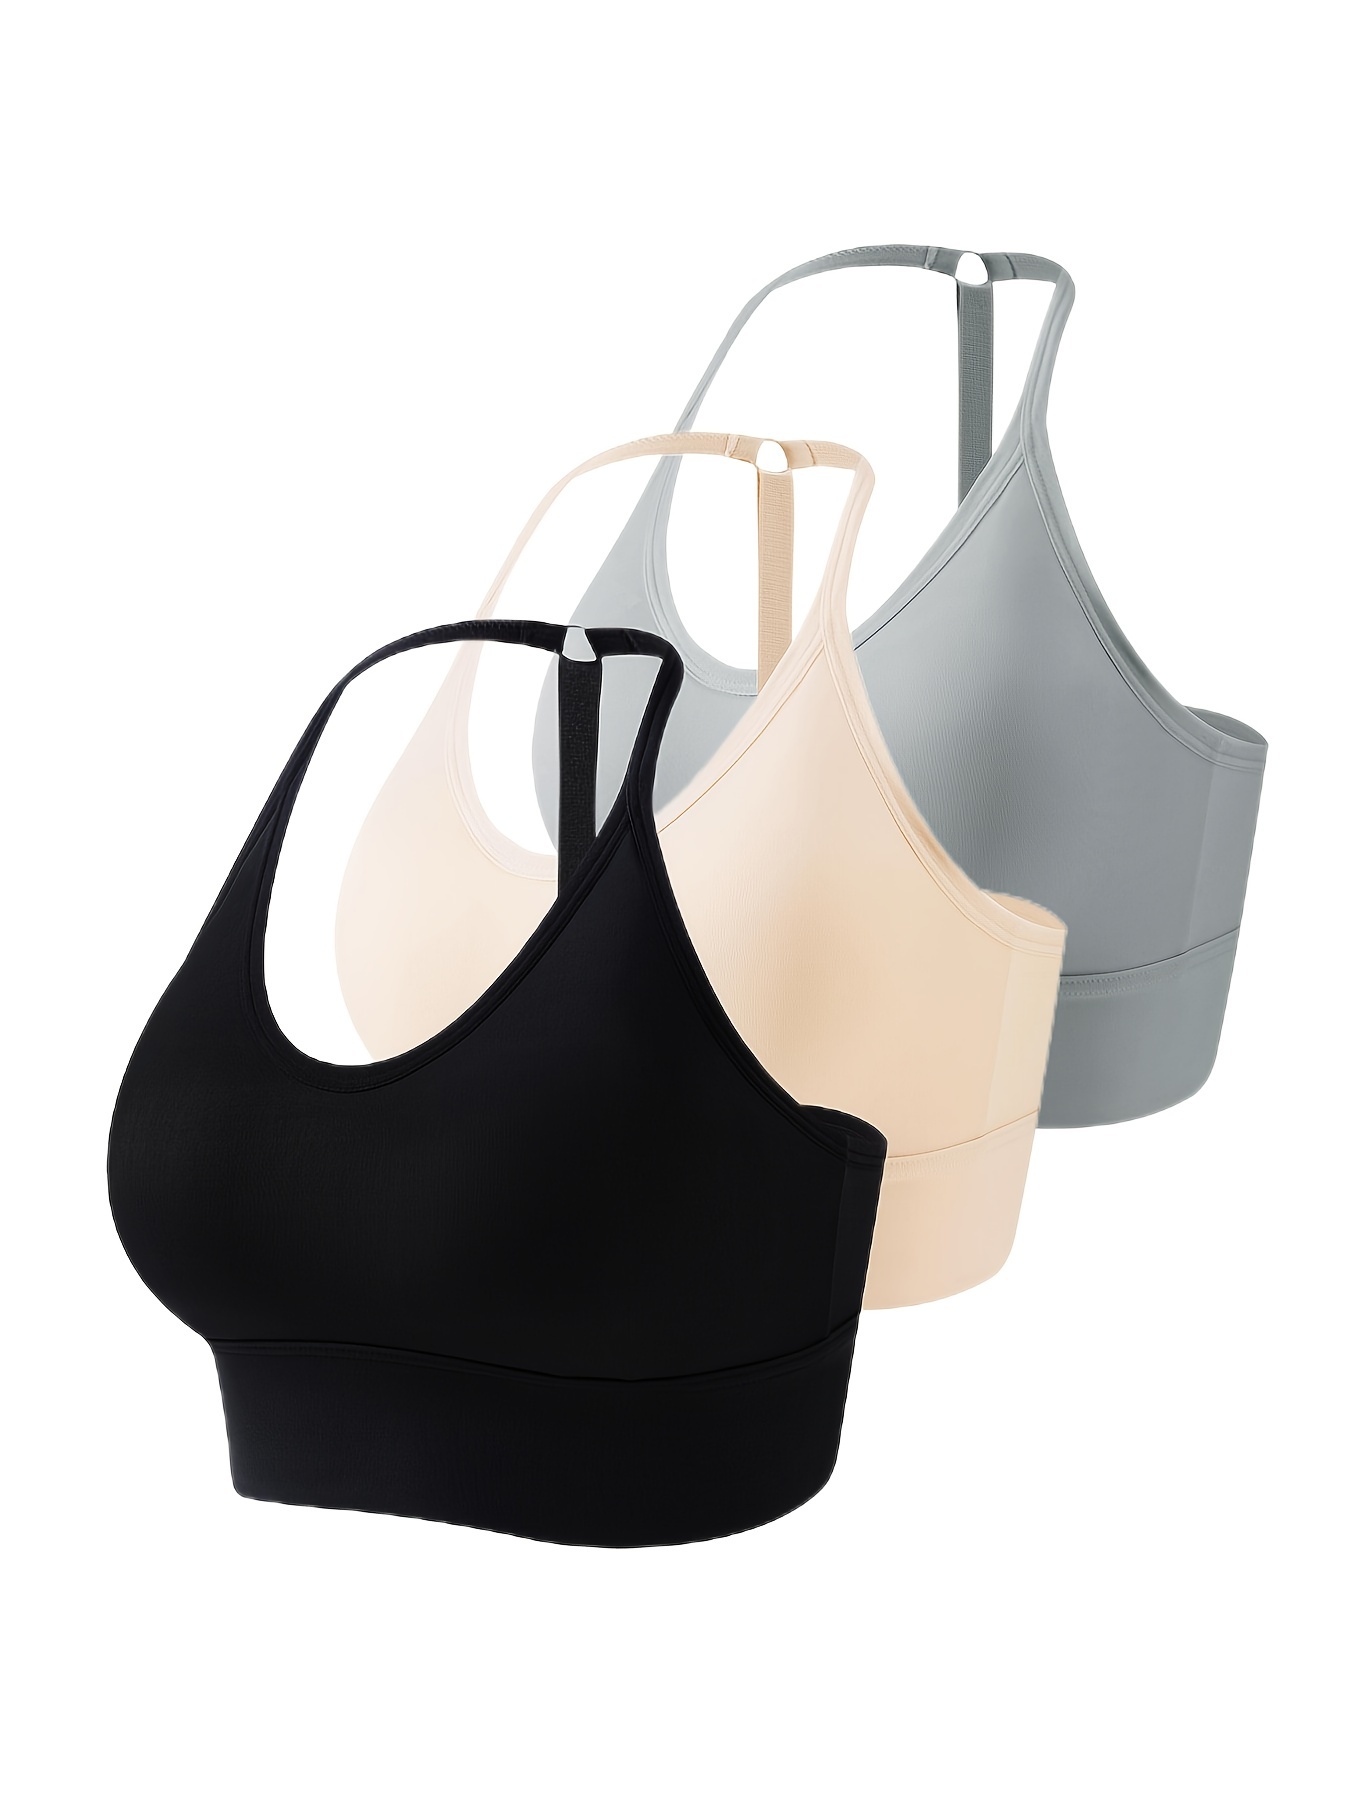  Womens 3 Piece Medium Support Tank Top Ribbed Seamless  Removable Cups Workout Exercise Sport Bra Black Coral Beige